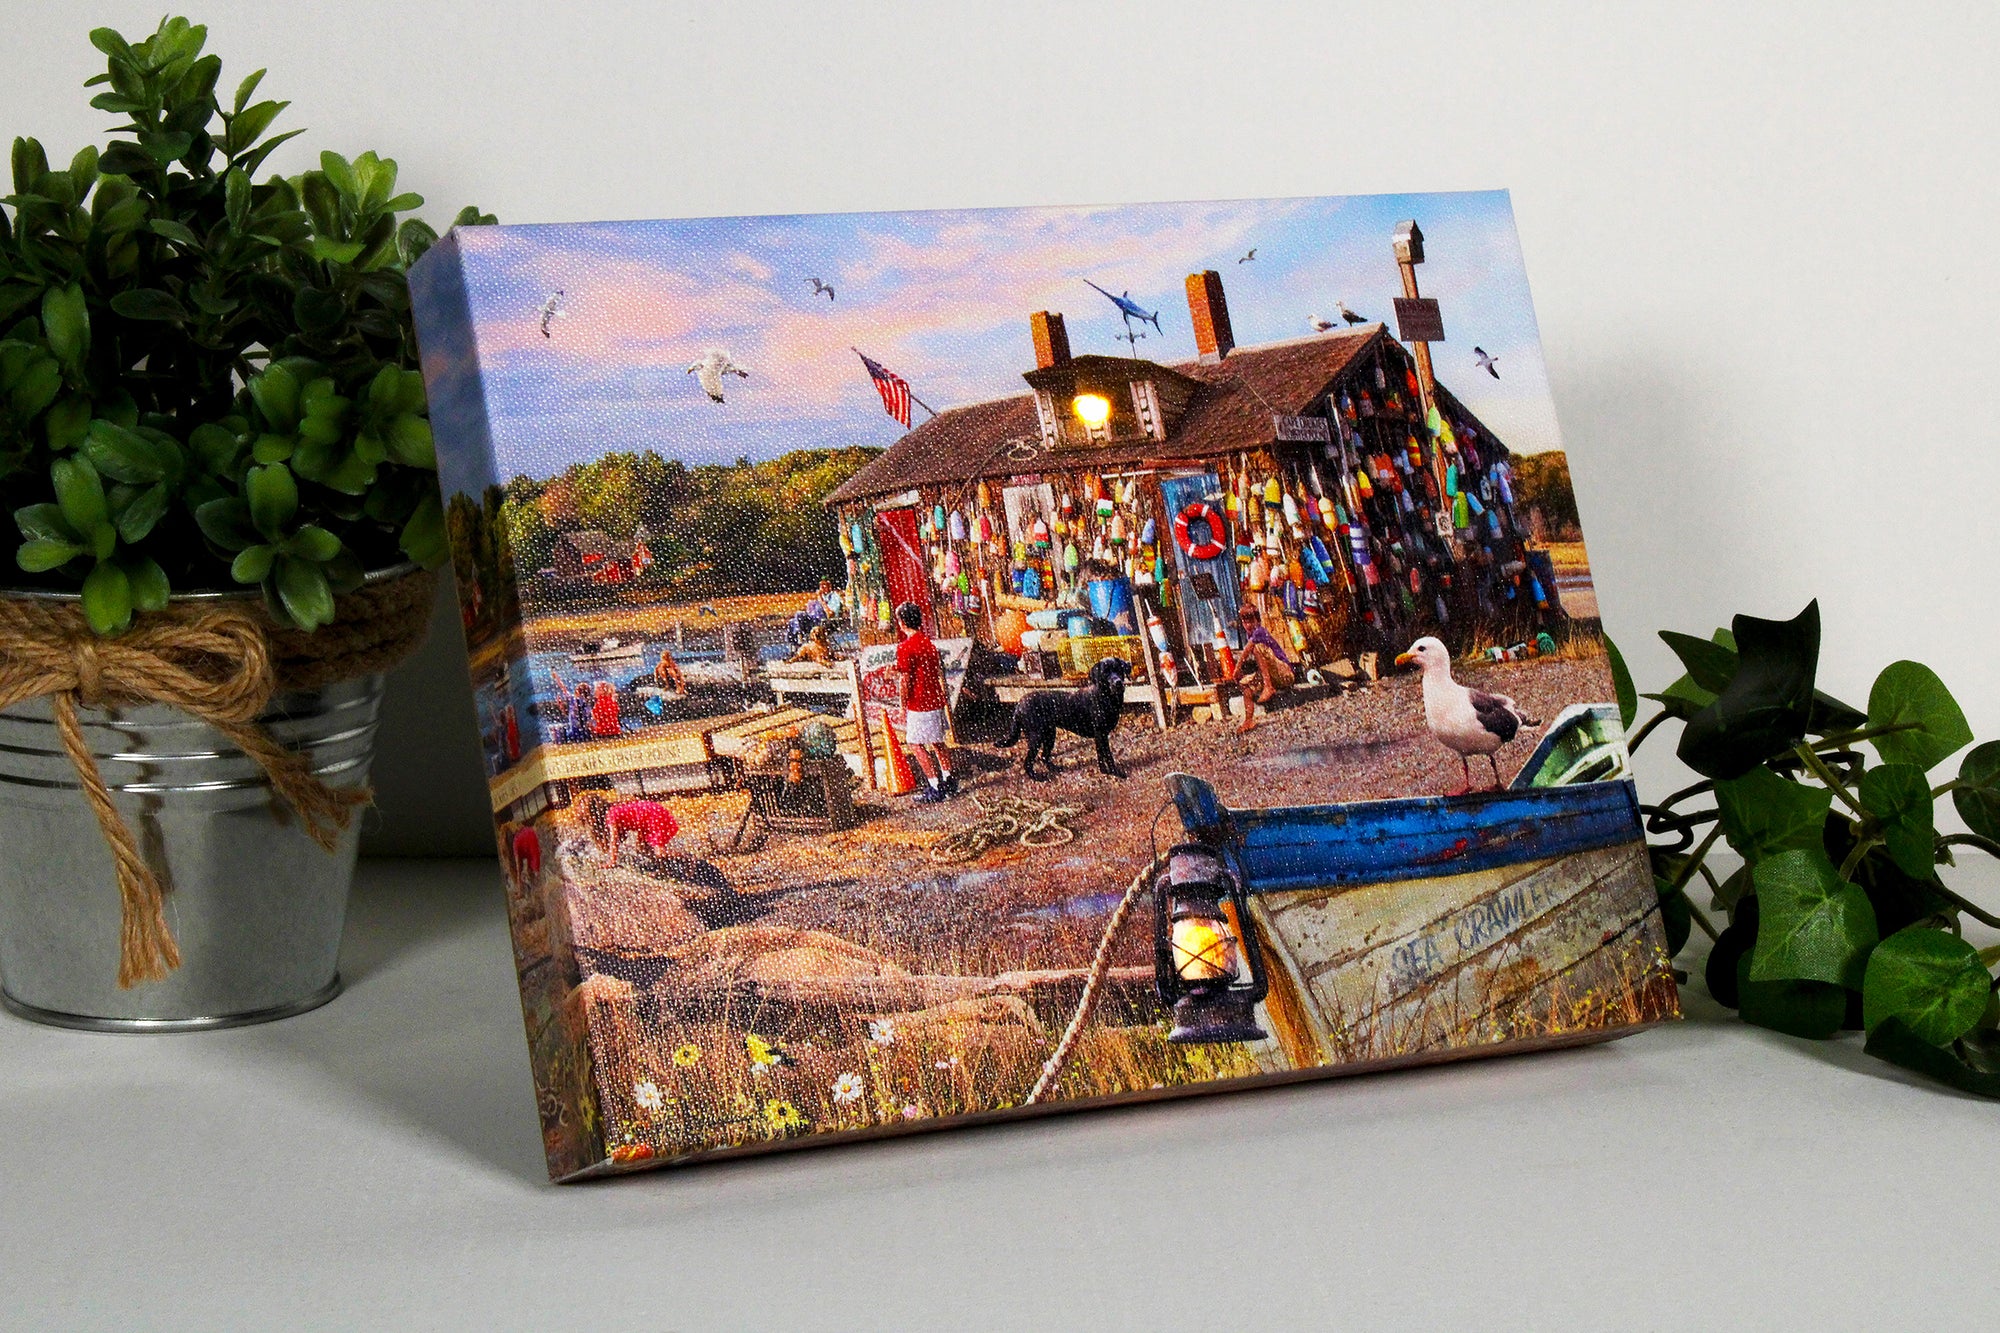 Adorned with buoys tied all over the outside walls, this charming canvas captures the essence of a quintessential lobster shack by the shore. Watch as children frolic along the sandy beach, while others enjoy the serene setting of the dock.